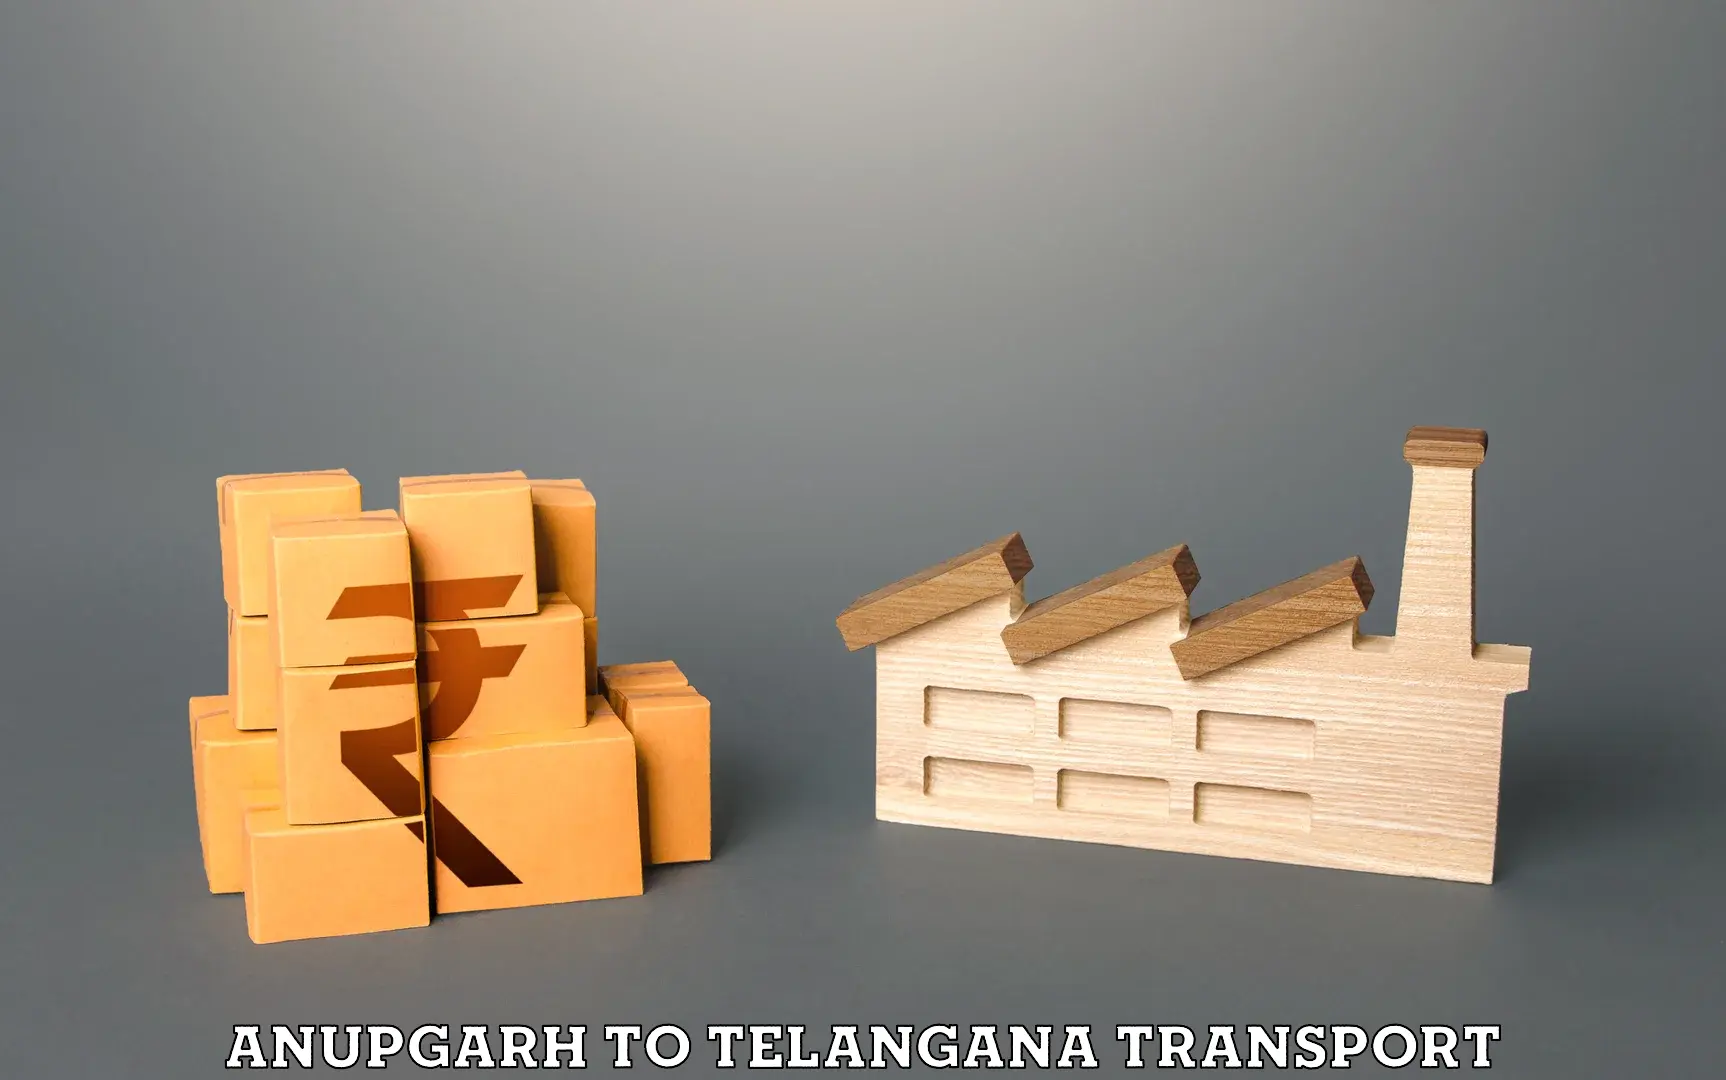 Container transport service Anupgarh to Bellampalli